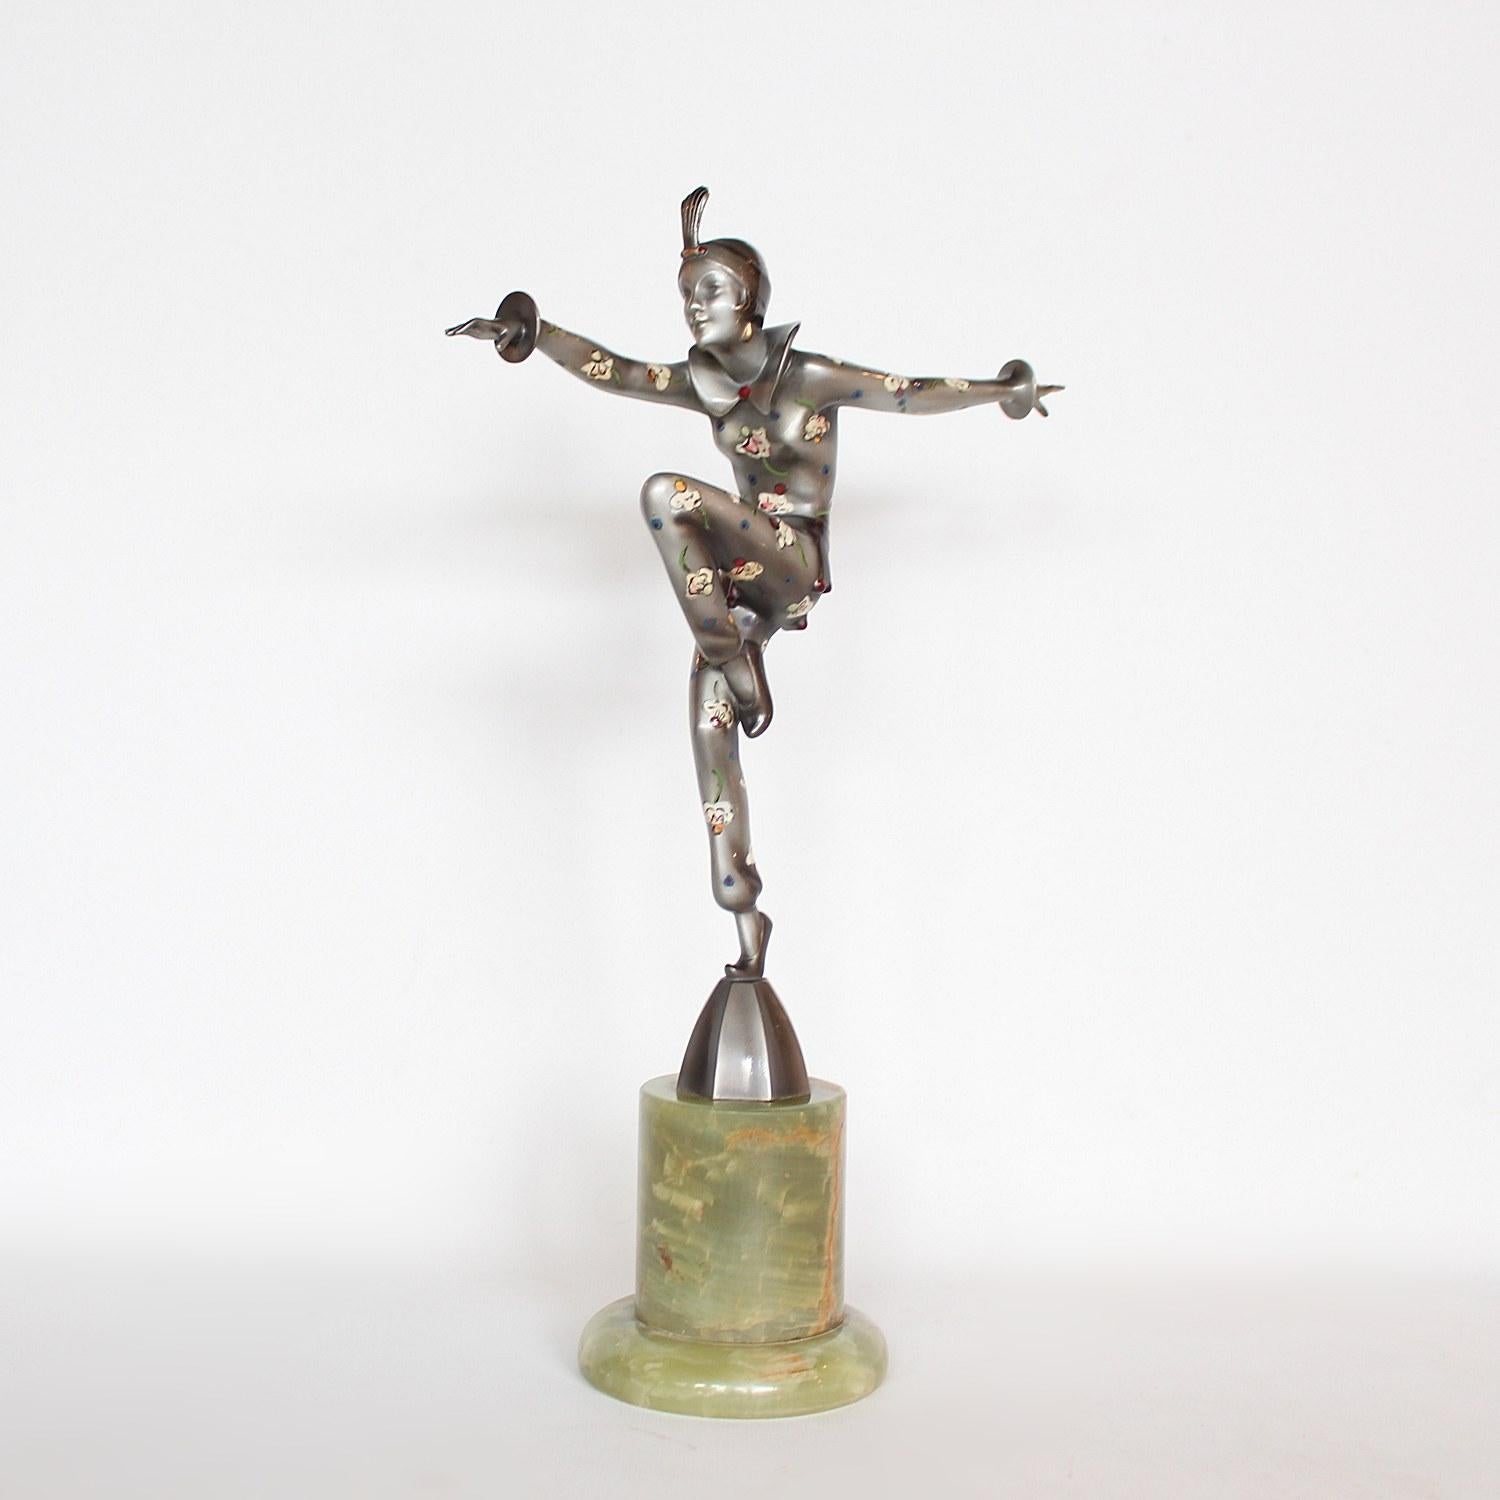 Con Brio, an Art Deco, cold painted bronze figure. A dancing woman in stylised pose set over a green onyx plinth, decorated with enamel painted flowers, signed Crejo to jacket. 

Signed Lorenzl to bronze

Artist: Josef Lorenzl